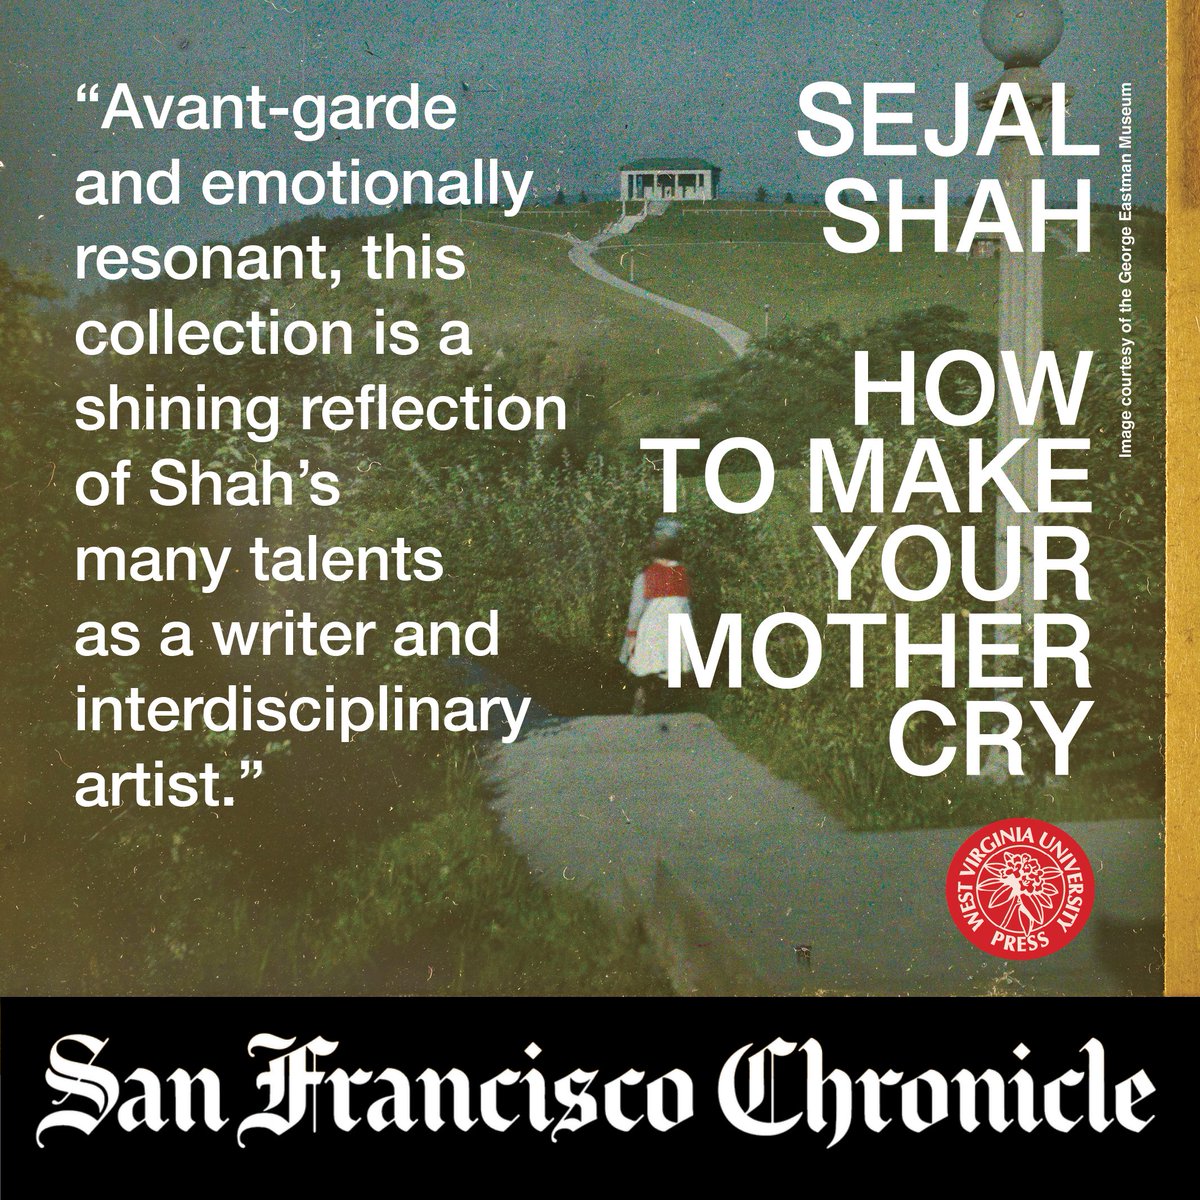 We're excited to see Sejal Shah's How to Make Your Mother Cry listed in the San Francisco Chronicle's Datebook feature '18 new books that celebrate the Asian American experience' in good company with Amy Tan, Viet Thanh Nguyen, Aimee Nezhukumatathil, and others.…